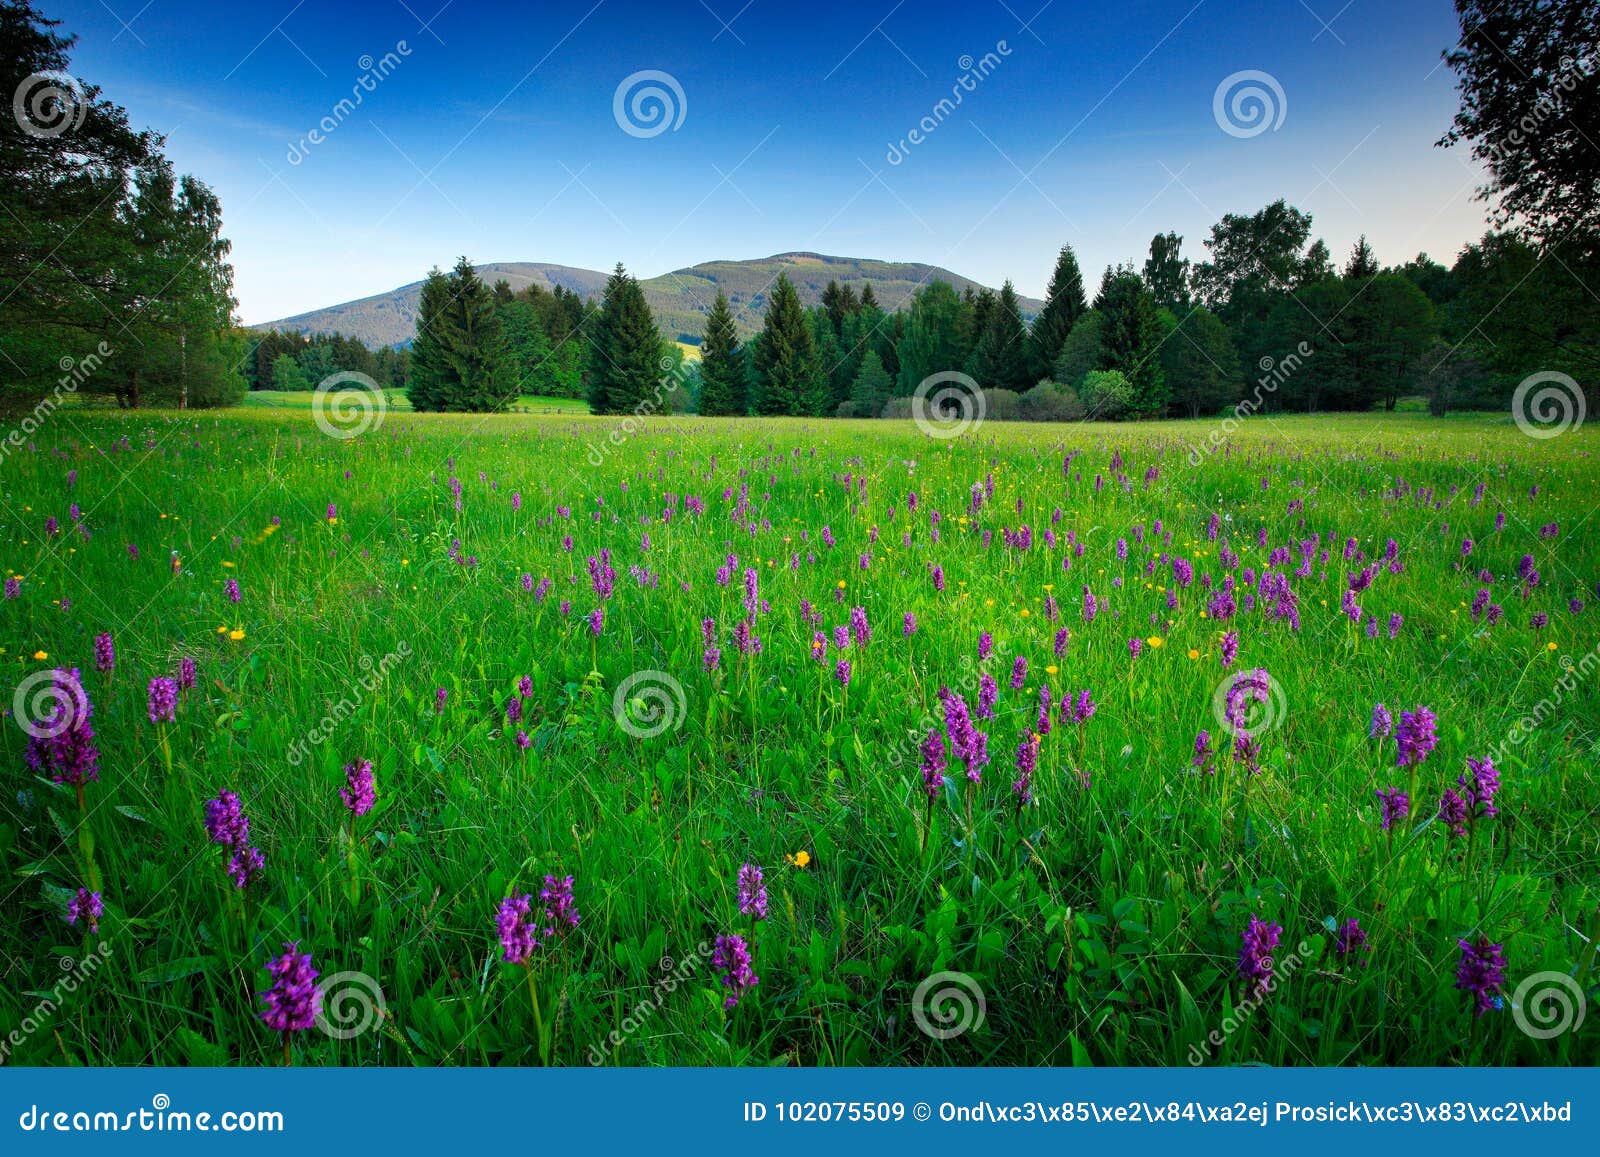 krkonose mountain, flowered meadow in the spring, forest hills, misty morning with fog and beautiful clouds, peak of snezka hill i